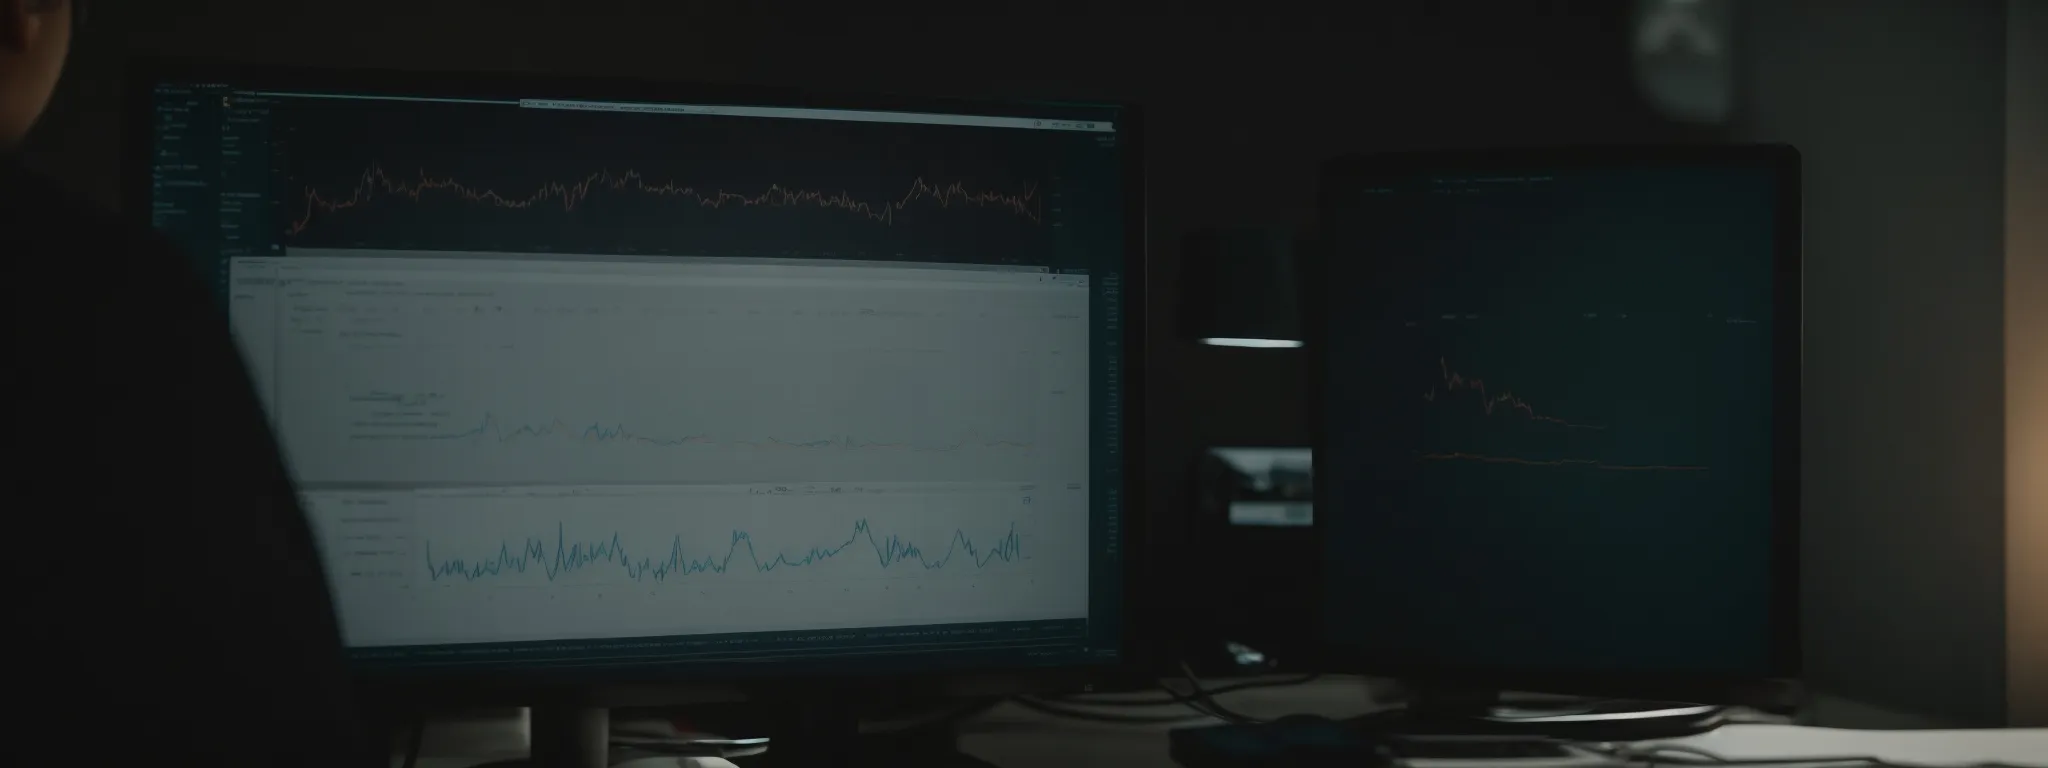 a person analyzing graphs and charts on a computer screen depicting website traffic data.